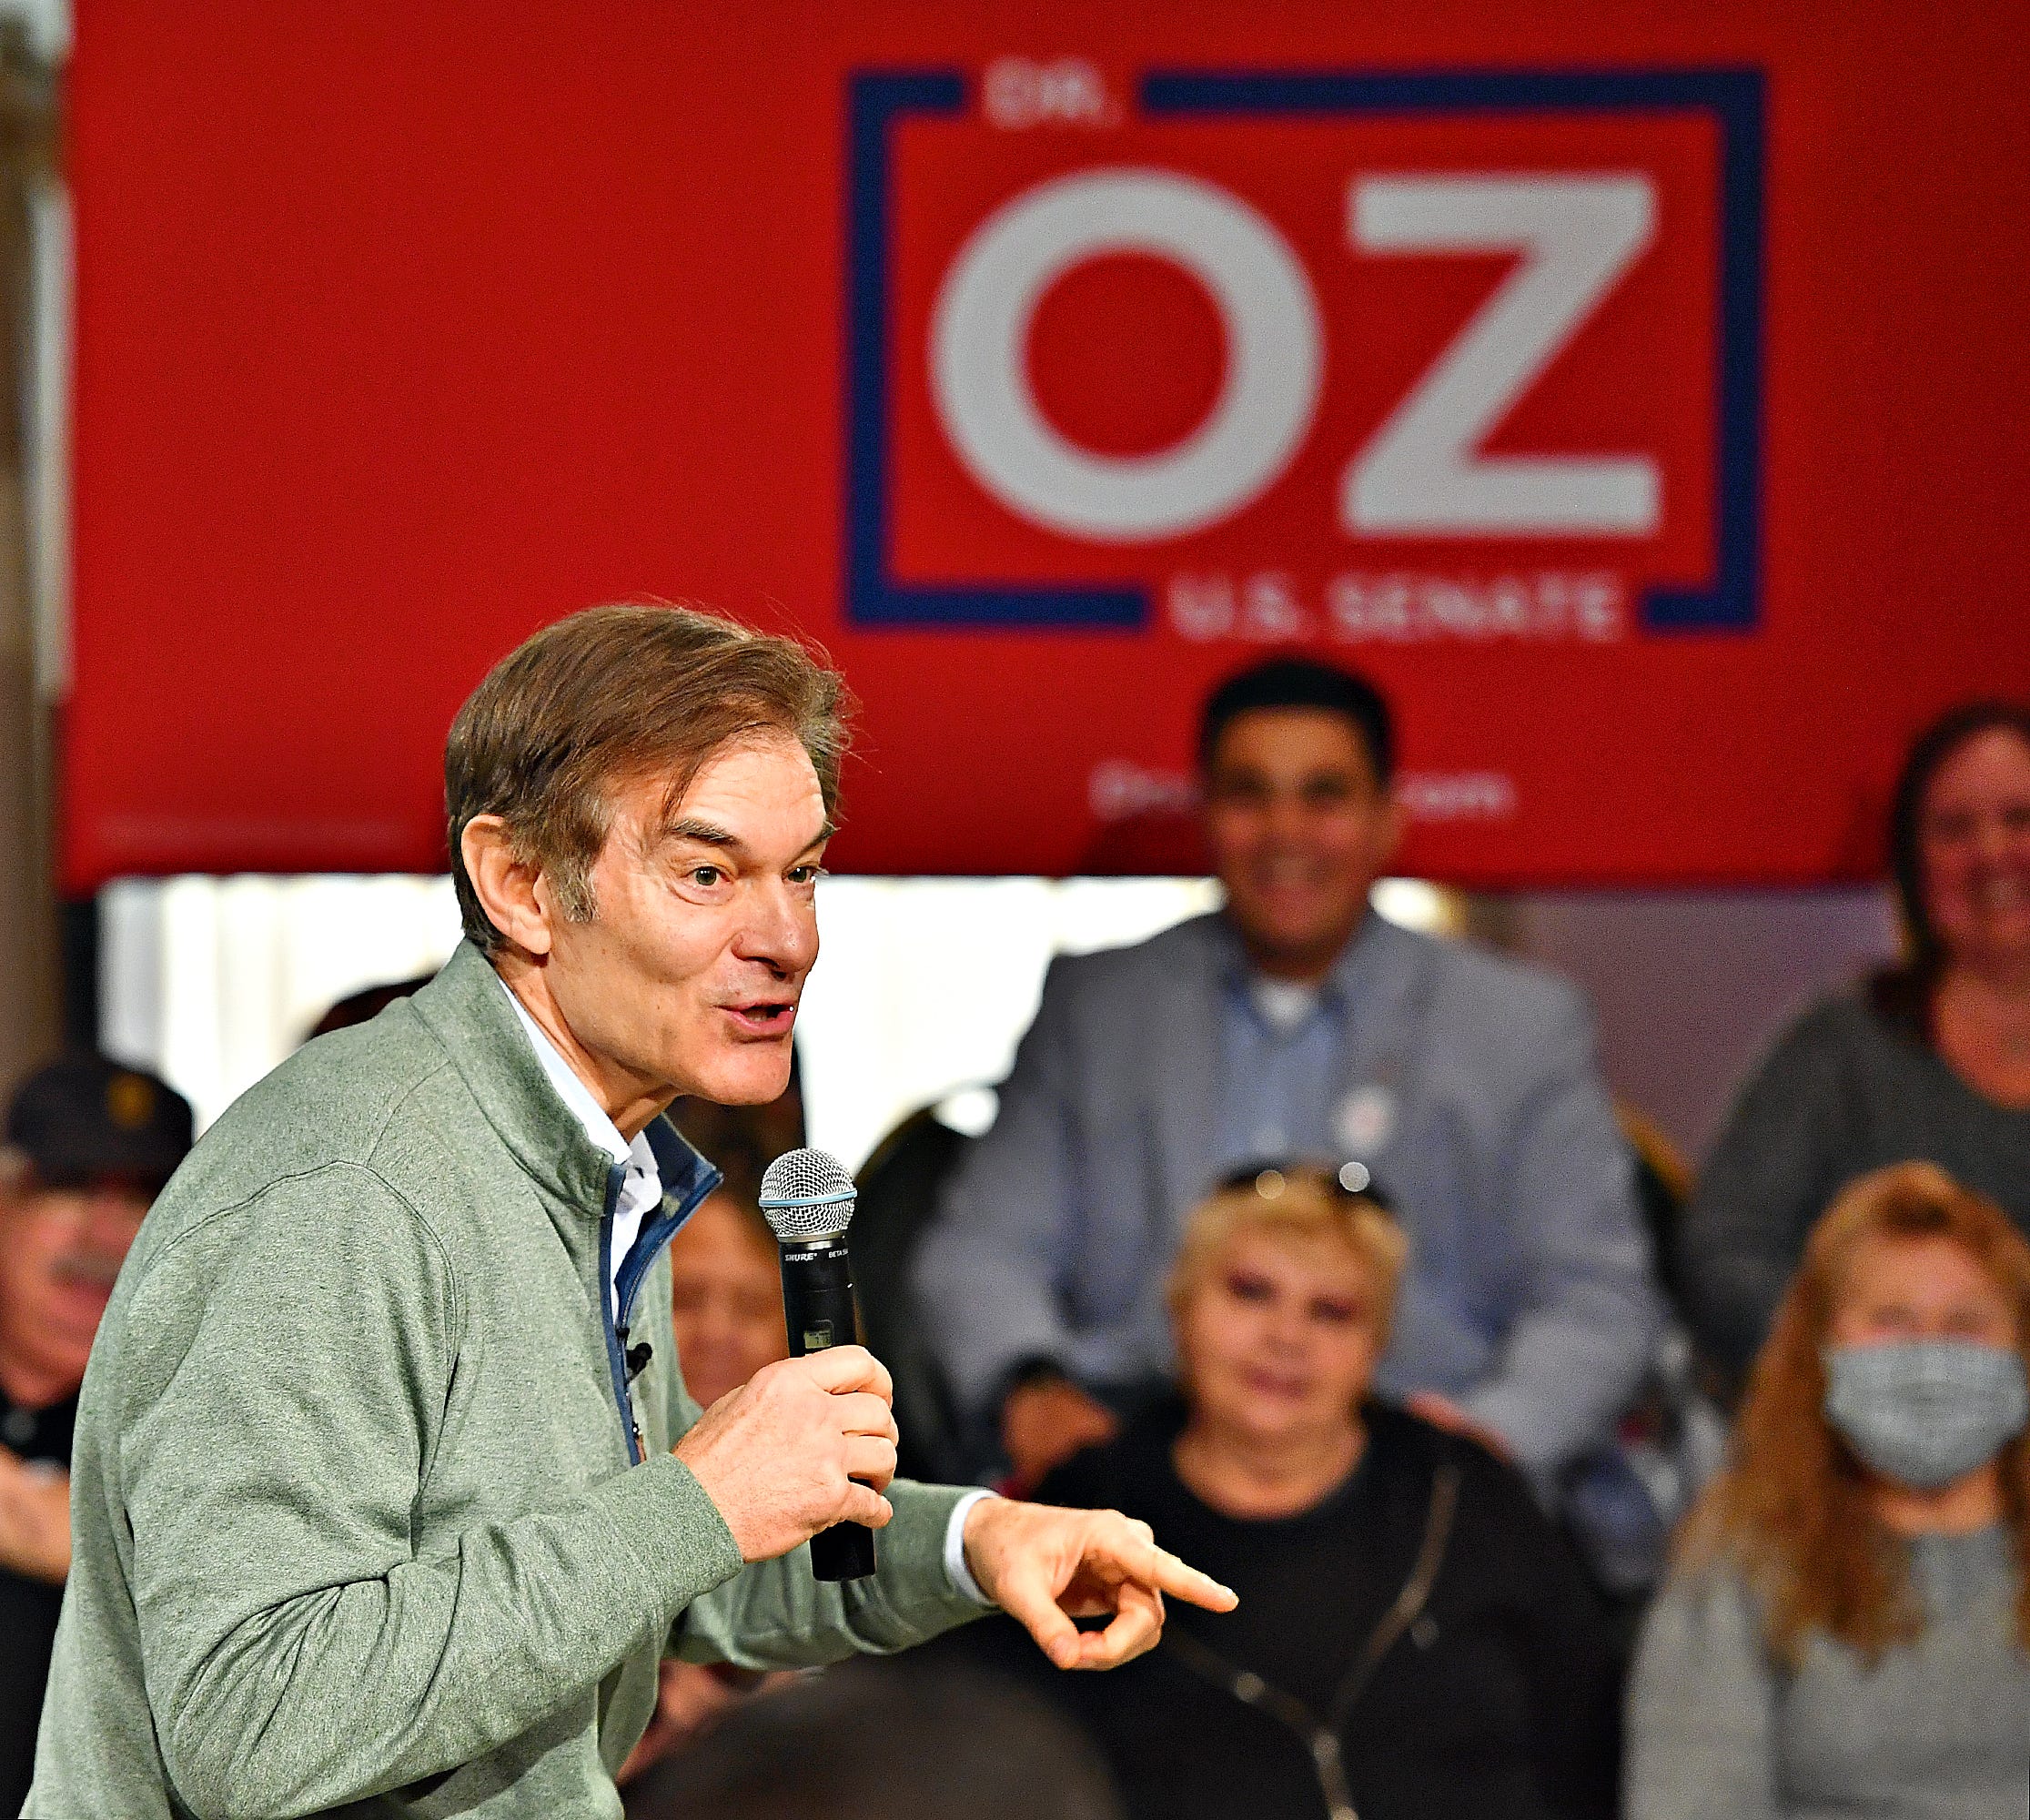 Dr. Mehmet Oz makes the fourth stop along his campaign trail, for the Pennsylvania U.S. Senate seat resigned by U.S. Sen. Pat Toomey, at Wisehaven Event Center in Windsor Township, Saturday, Feb. 5, 2022. Dawn J. Sagert photo